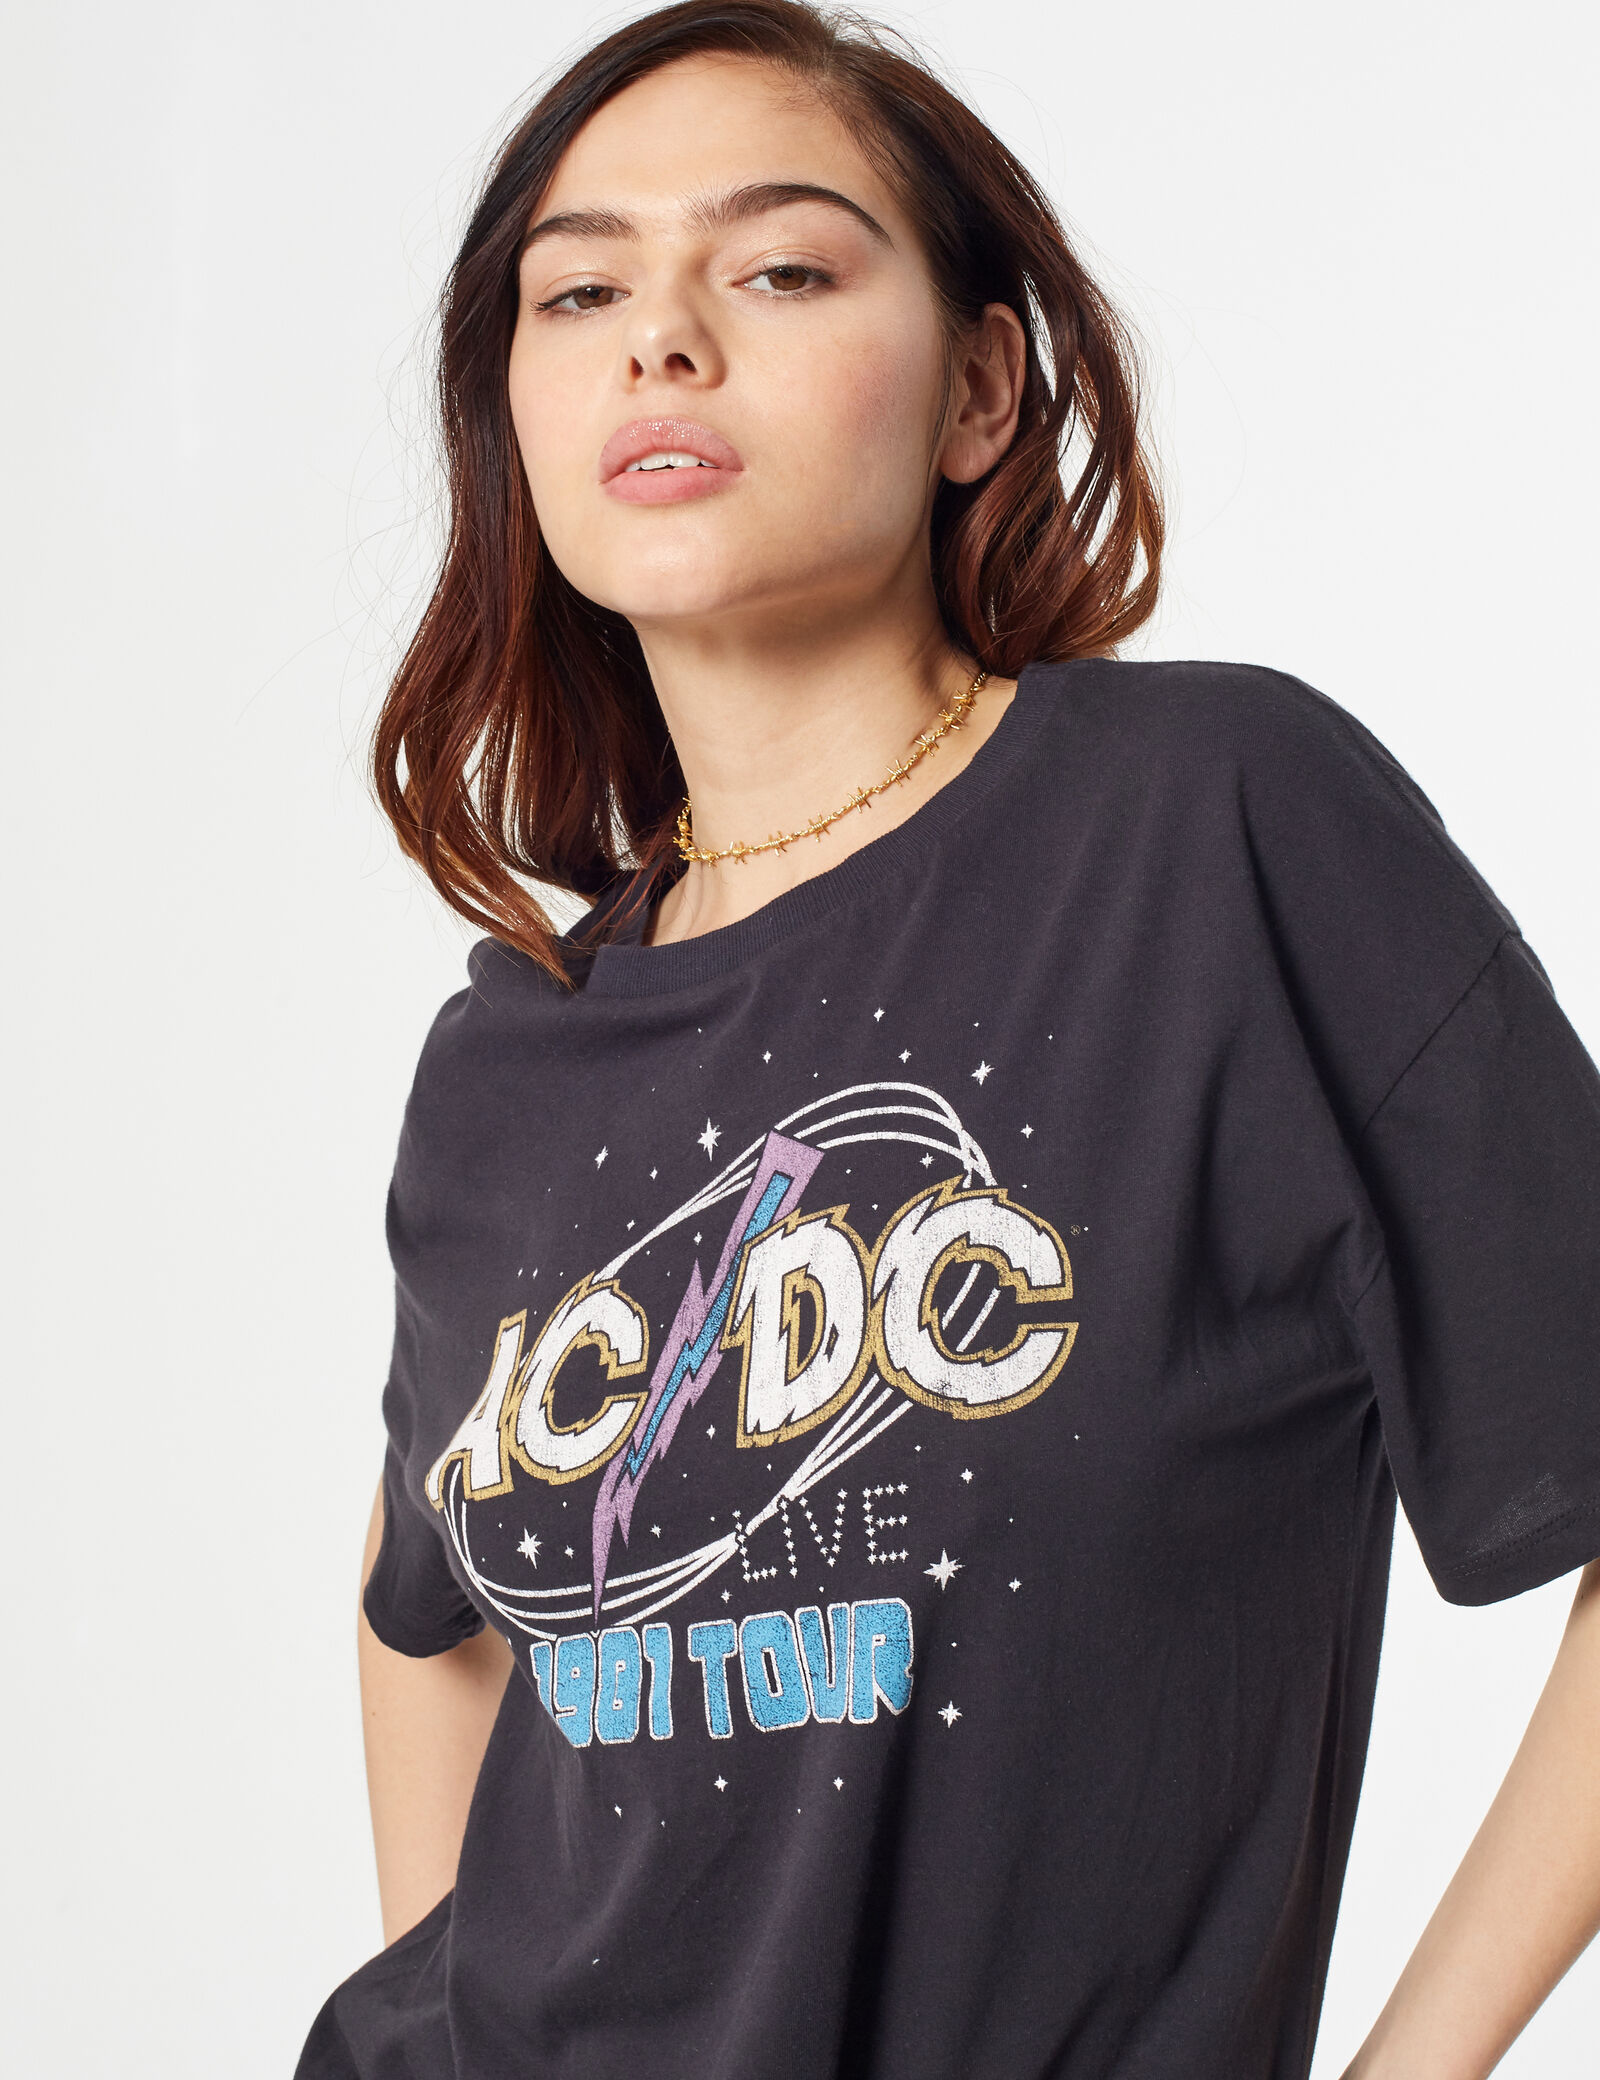 acdc t shirt